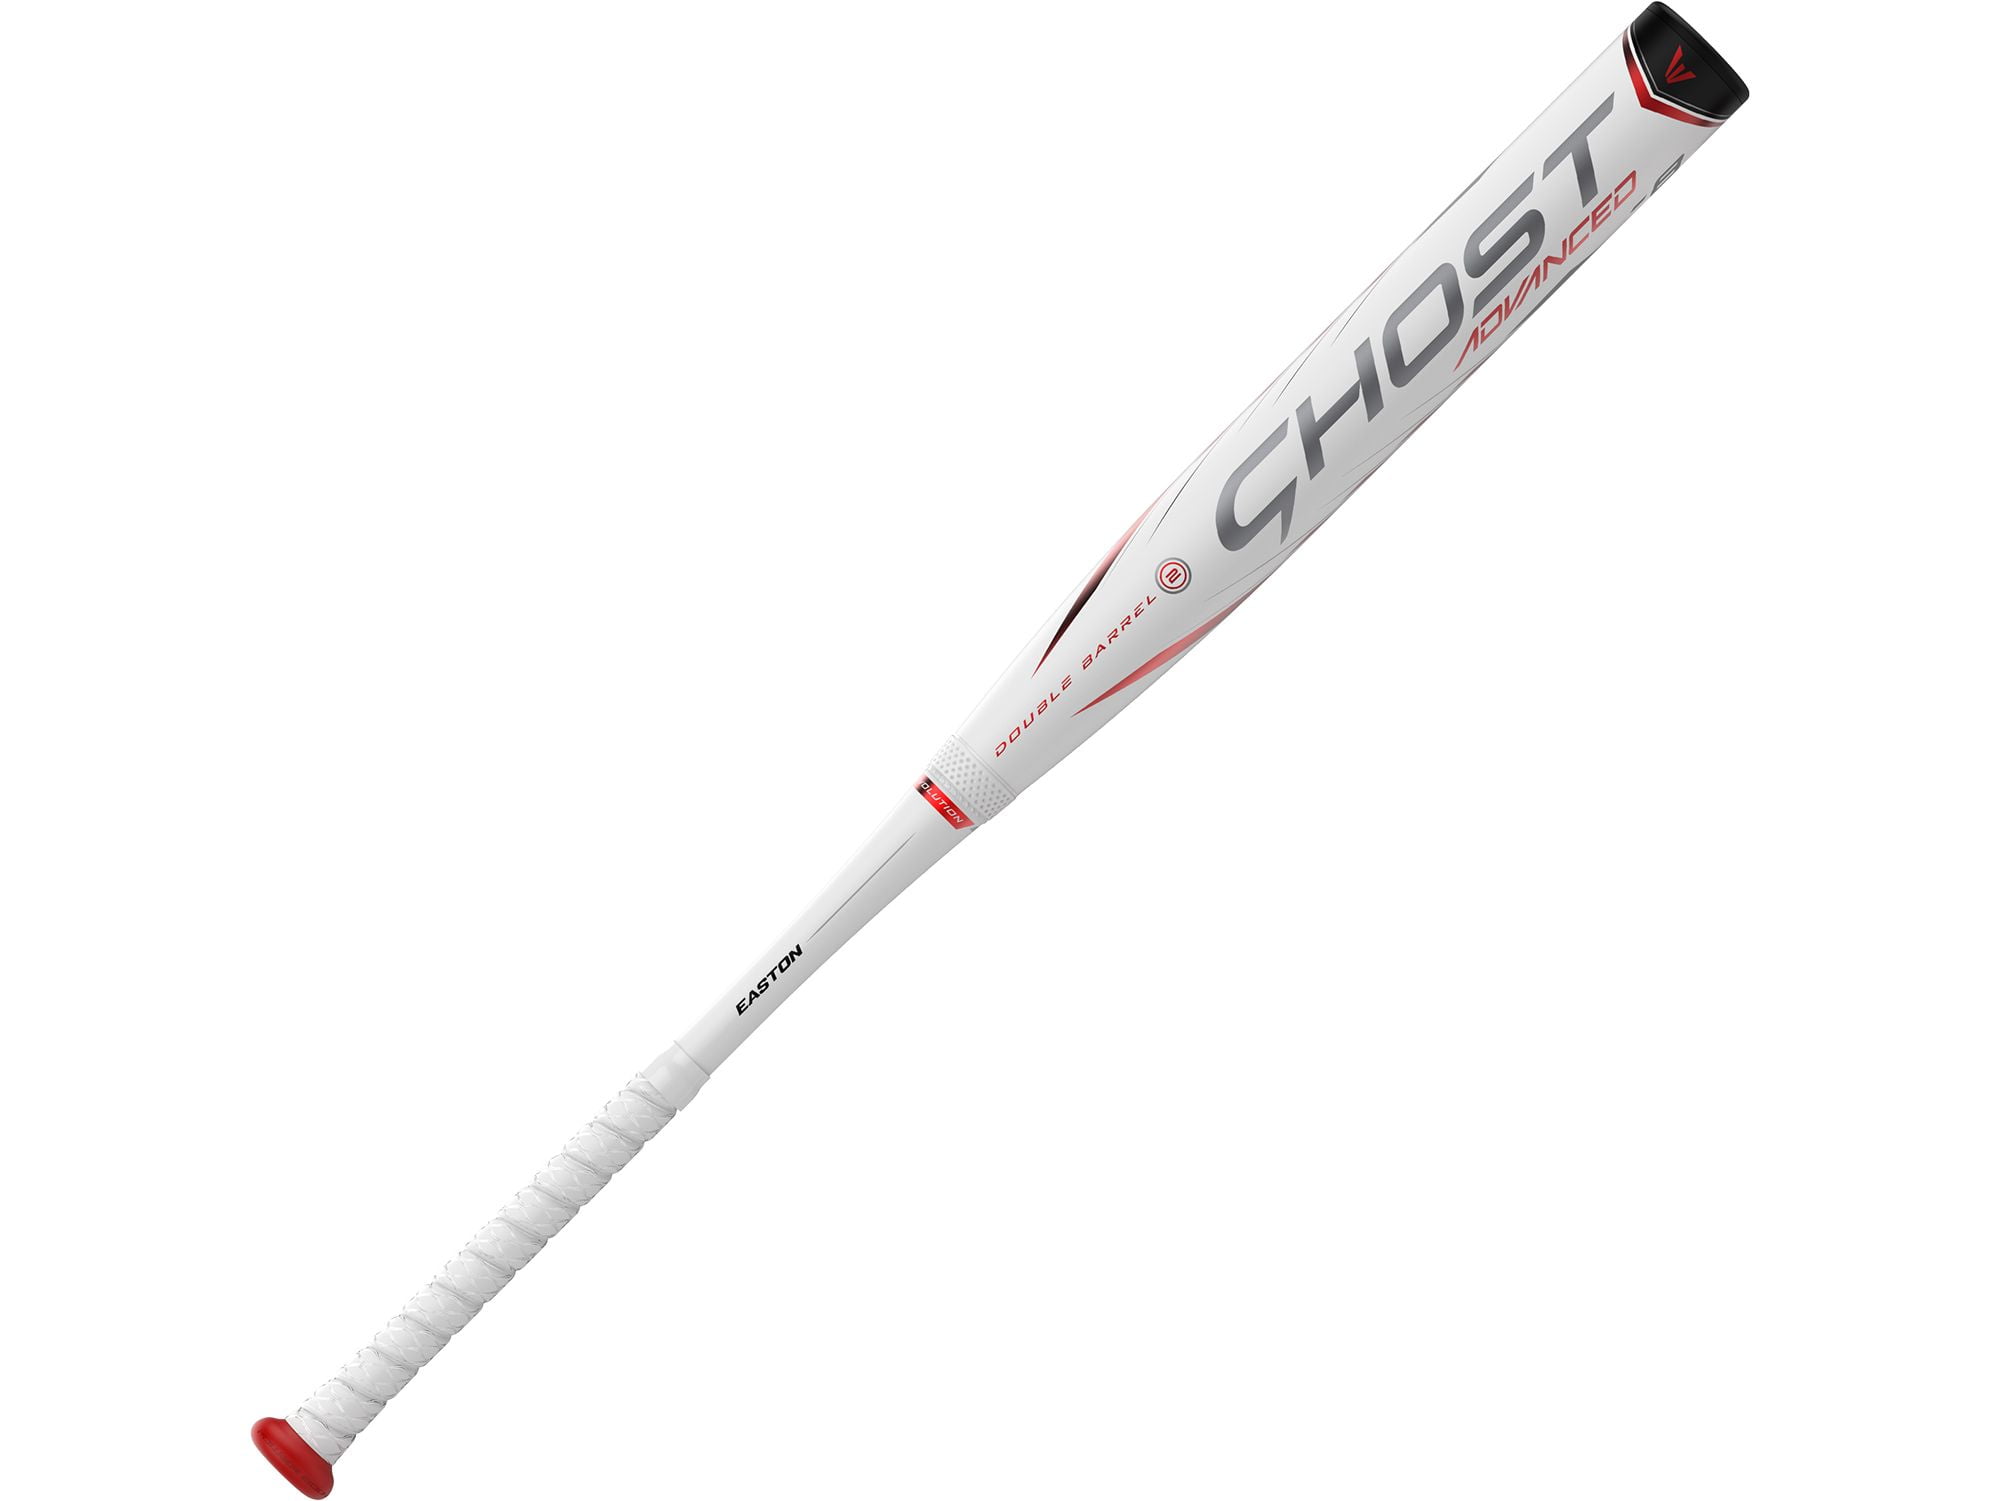 Approved for All Fields Aluminum 1 Pc -10 Easton TOPAZ Fastpitch Softball Bat 